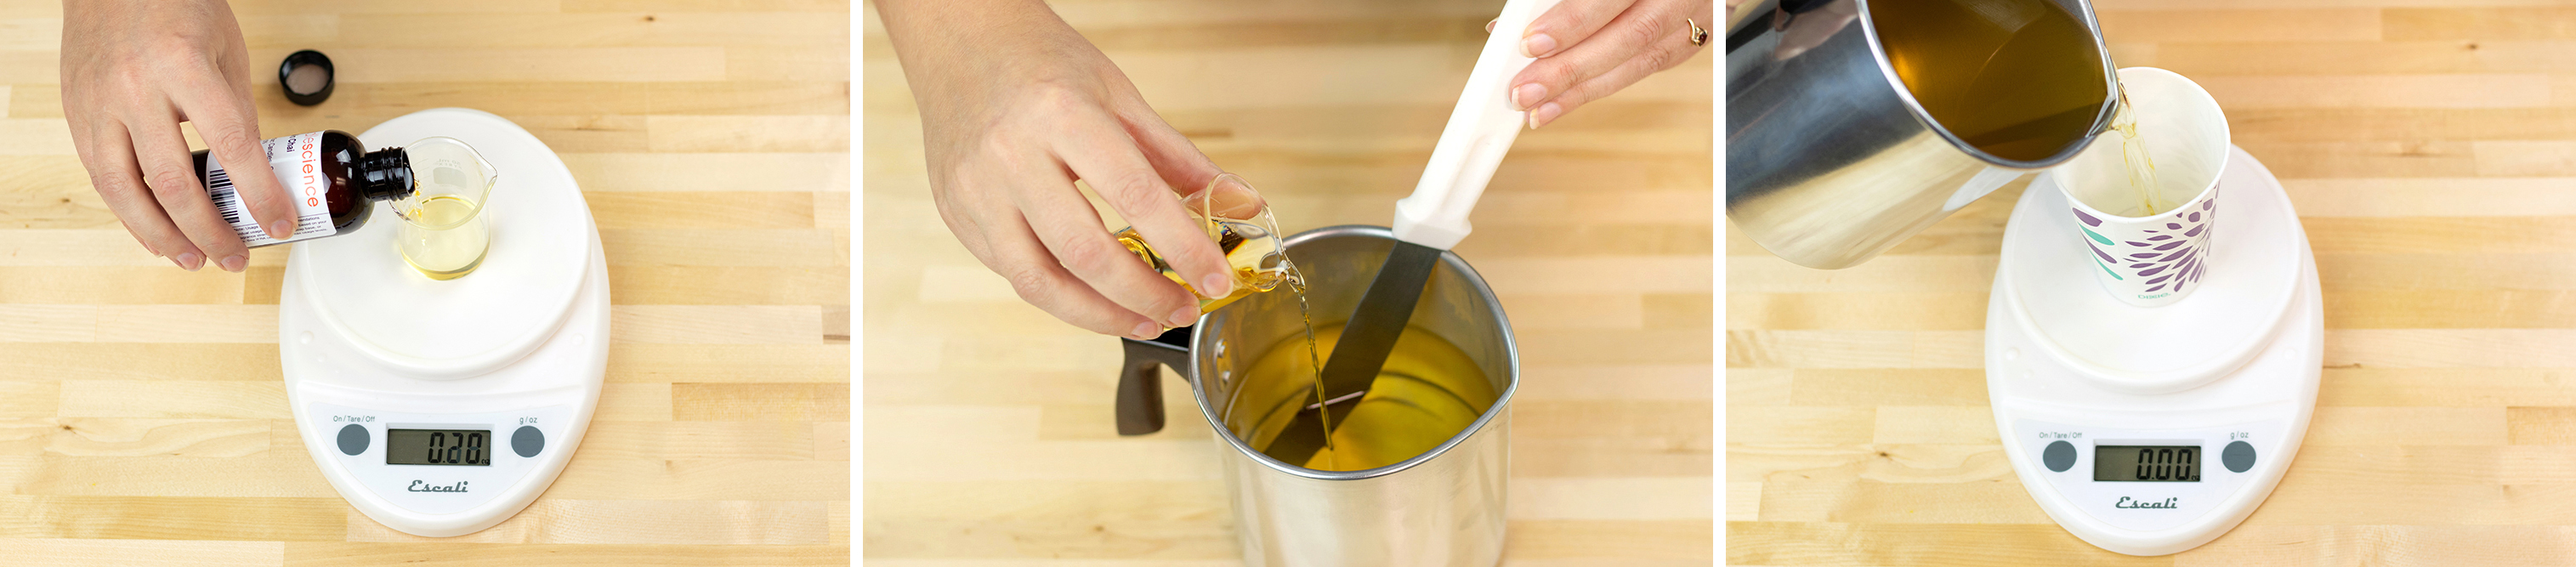 Measuring and pouring fragrance oil.